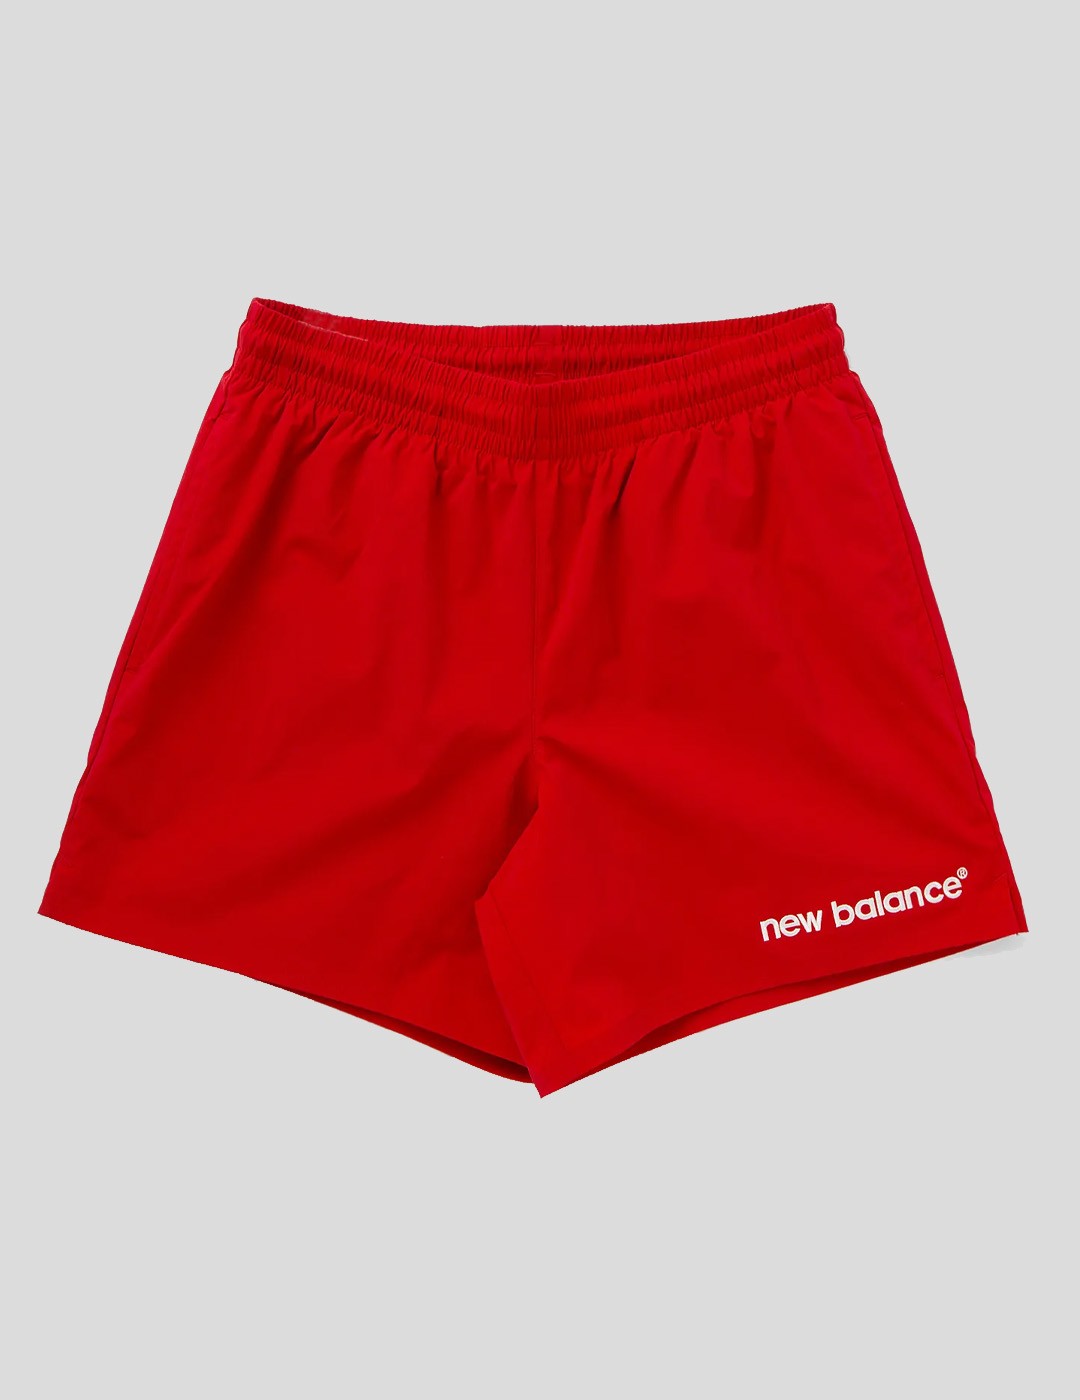 SHORTS NEW BALANCE ARCHIVE 1997 WIND SHORT  TRUE RED